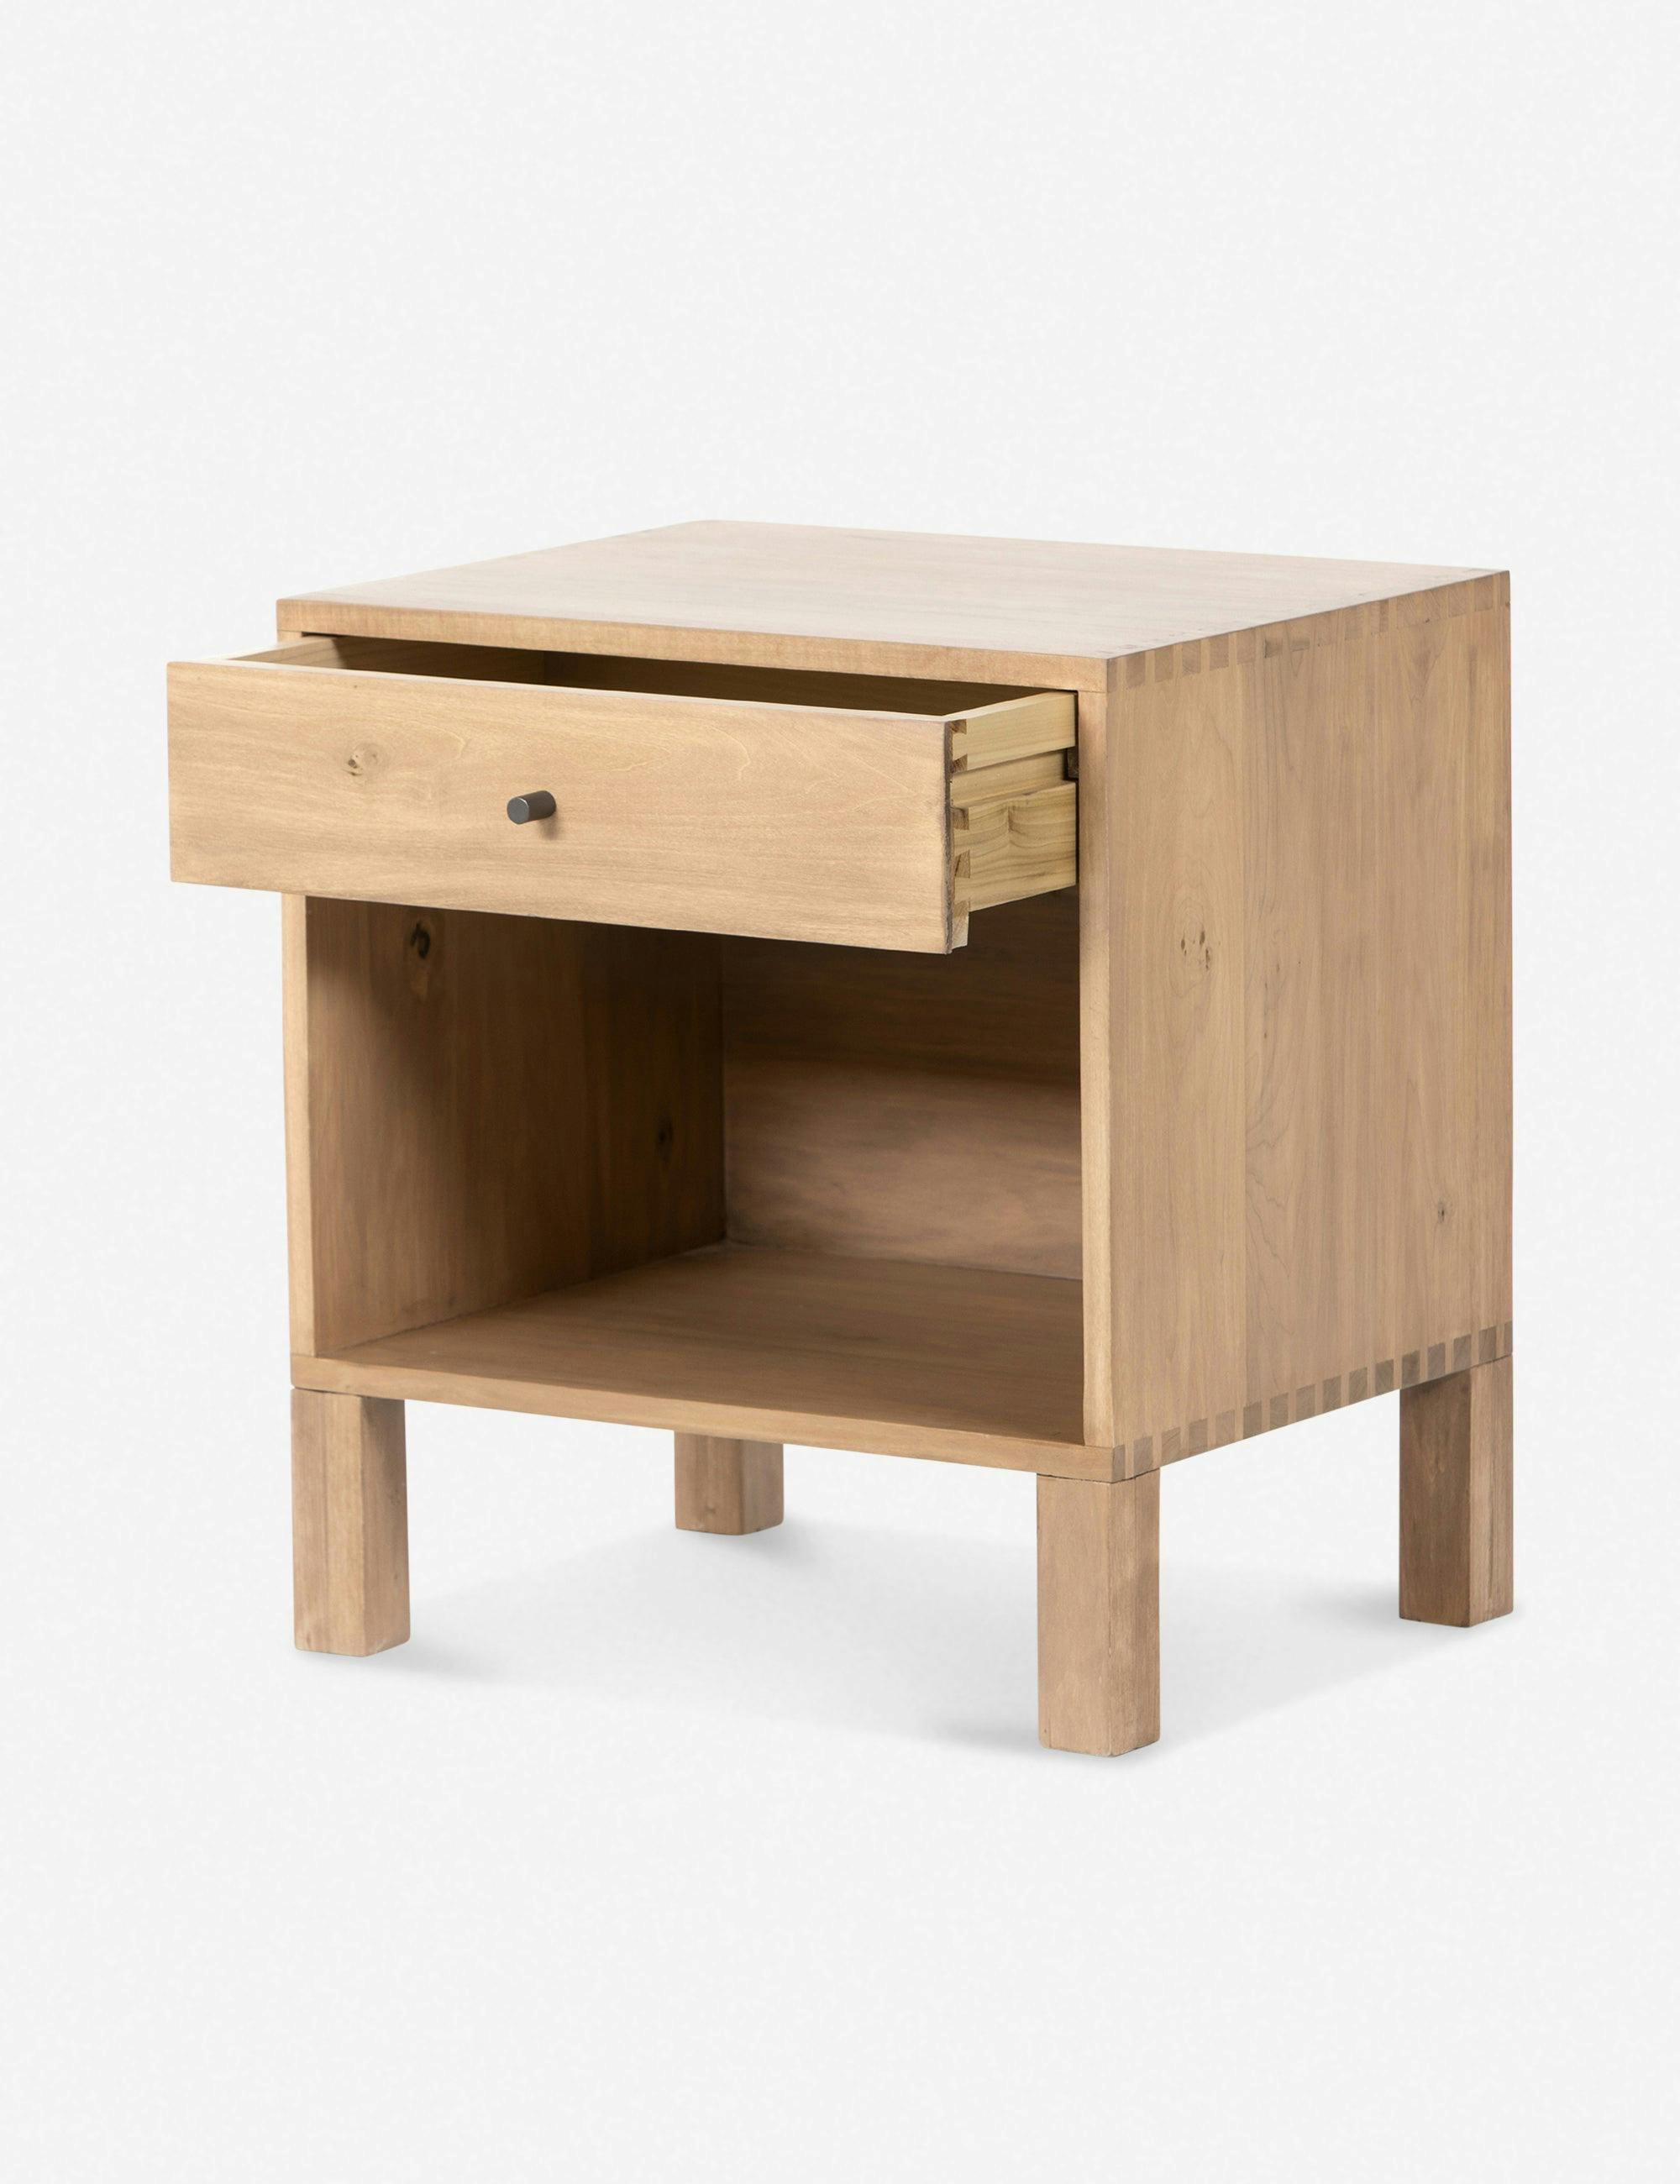 Isador Cubed Nightstand in Dry Wash Poplar with Iron and Leather Accents